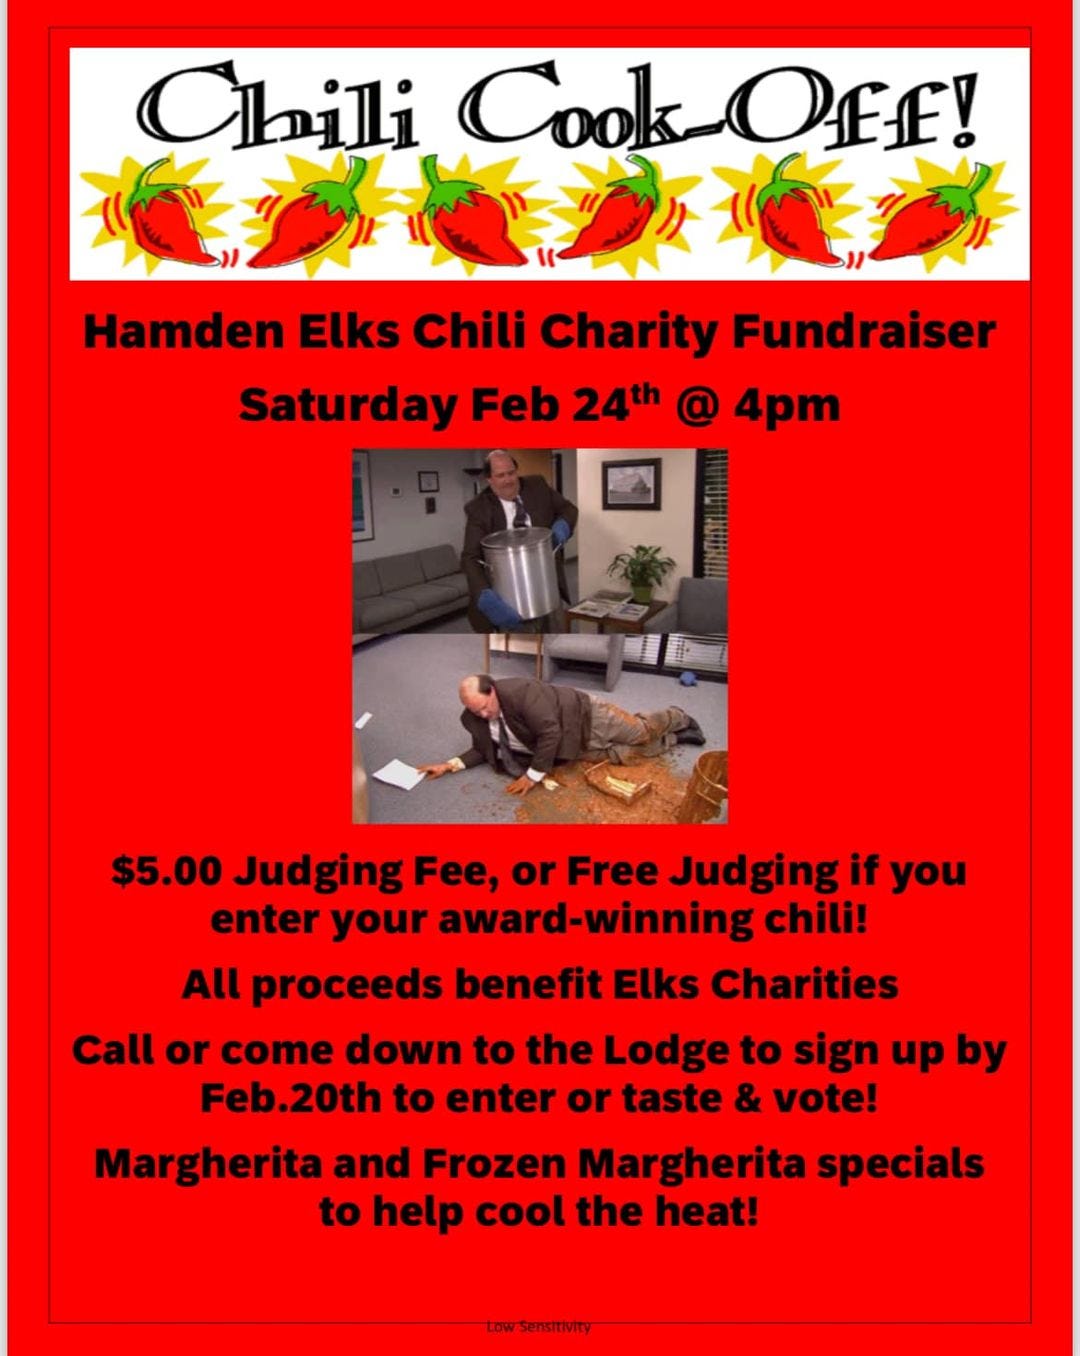 May be an image of 2 people and text that says 'Chili Cook-正正! Hamden Elks Chili Charity Fundraiser Saturday Feb 24th @ 4pm $5.00 Judging Fee, or Free Judging if you enter your award-winning chili! All proceeds benefit Elks Charities Call or come down to the Lodge to sign up by Feb.20th to enter or taste & vote! Margherita and Frozen Margherita specials to help cool the heat! towSensitivity'